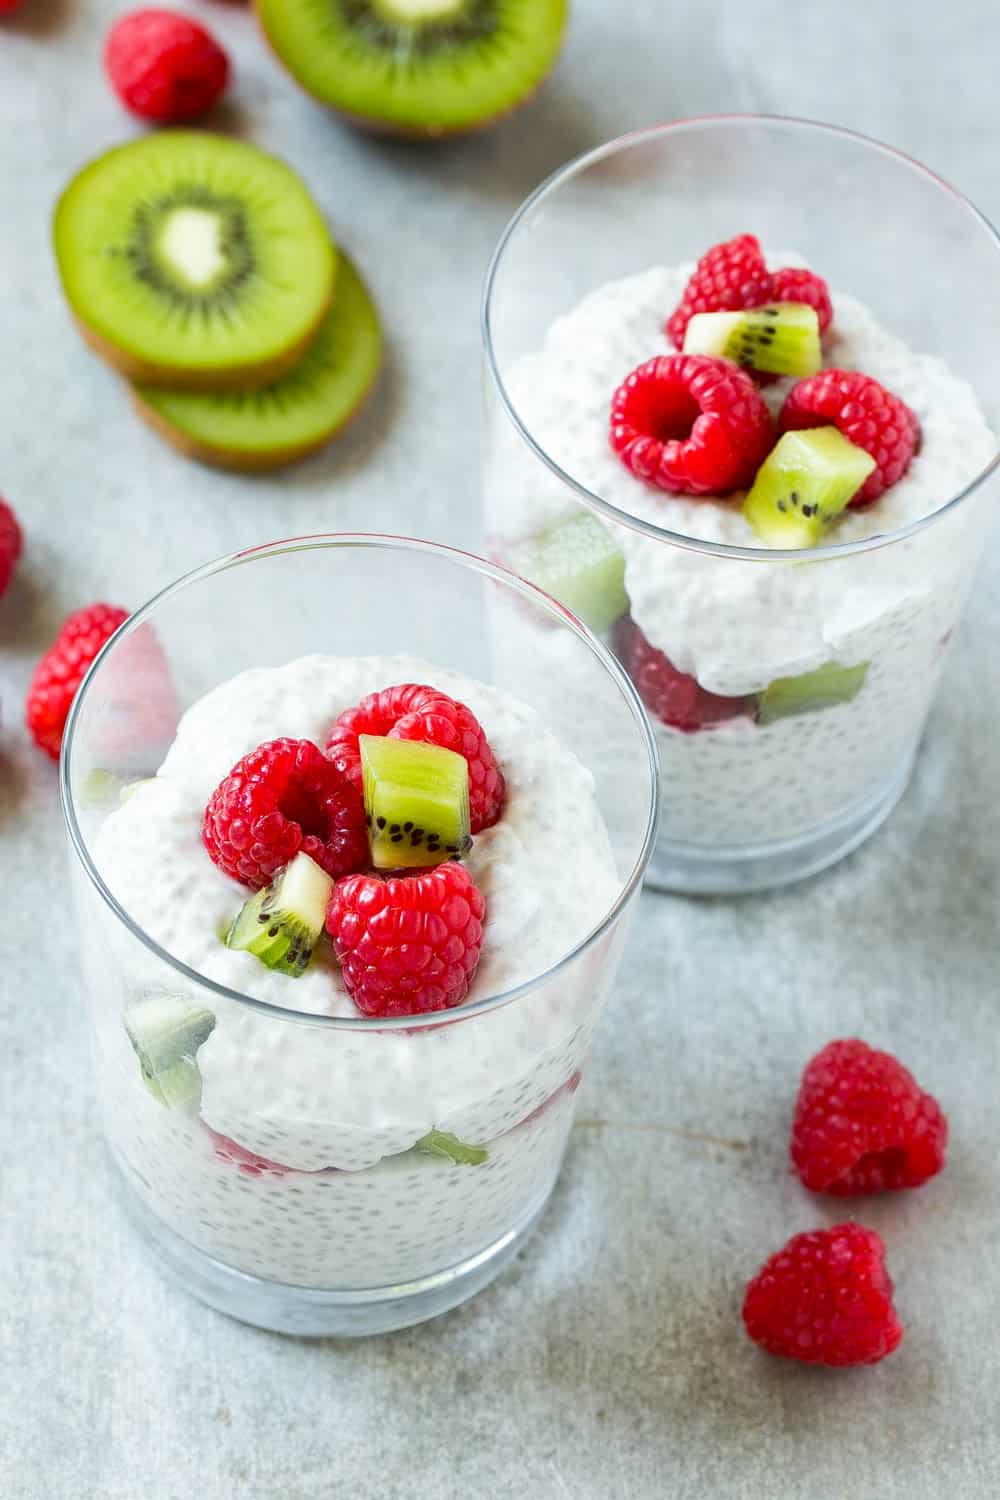 Easy Coconut Chia Pudding with kiwi and fruit served in glass dish